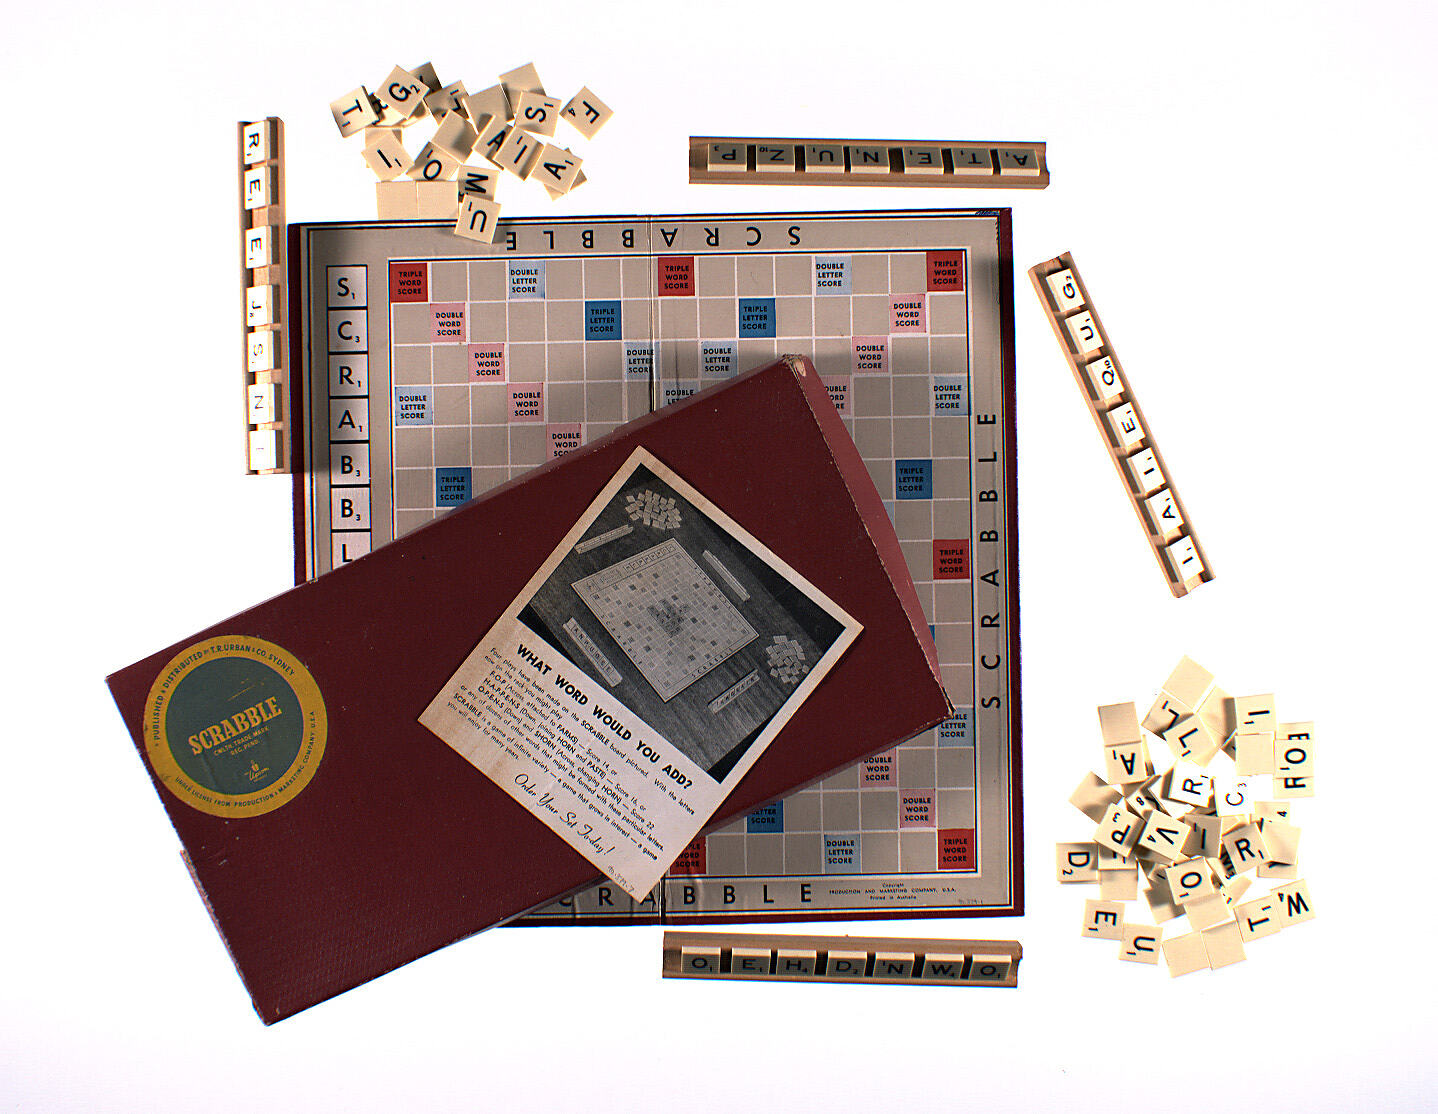 Vintage 1989 Scrabble Deluxe Edition Game 